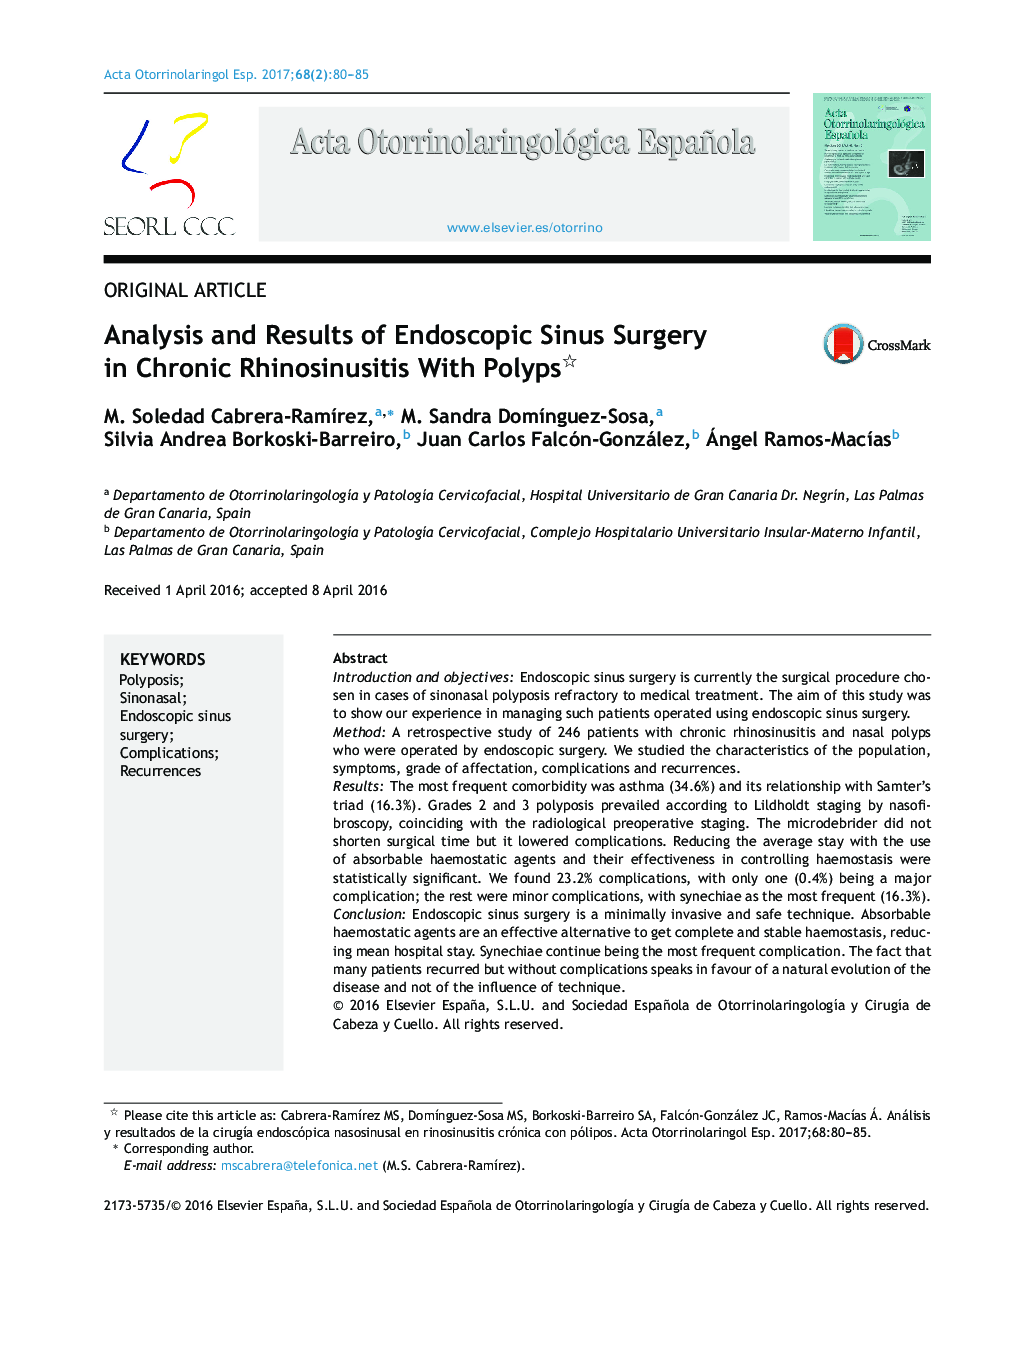 Analysis and Results of Endoscopic Sinus Surgery in Chronic Rhinosinusitis With Polyps